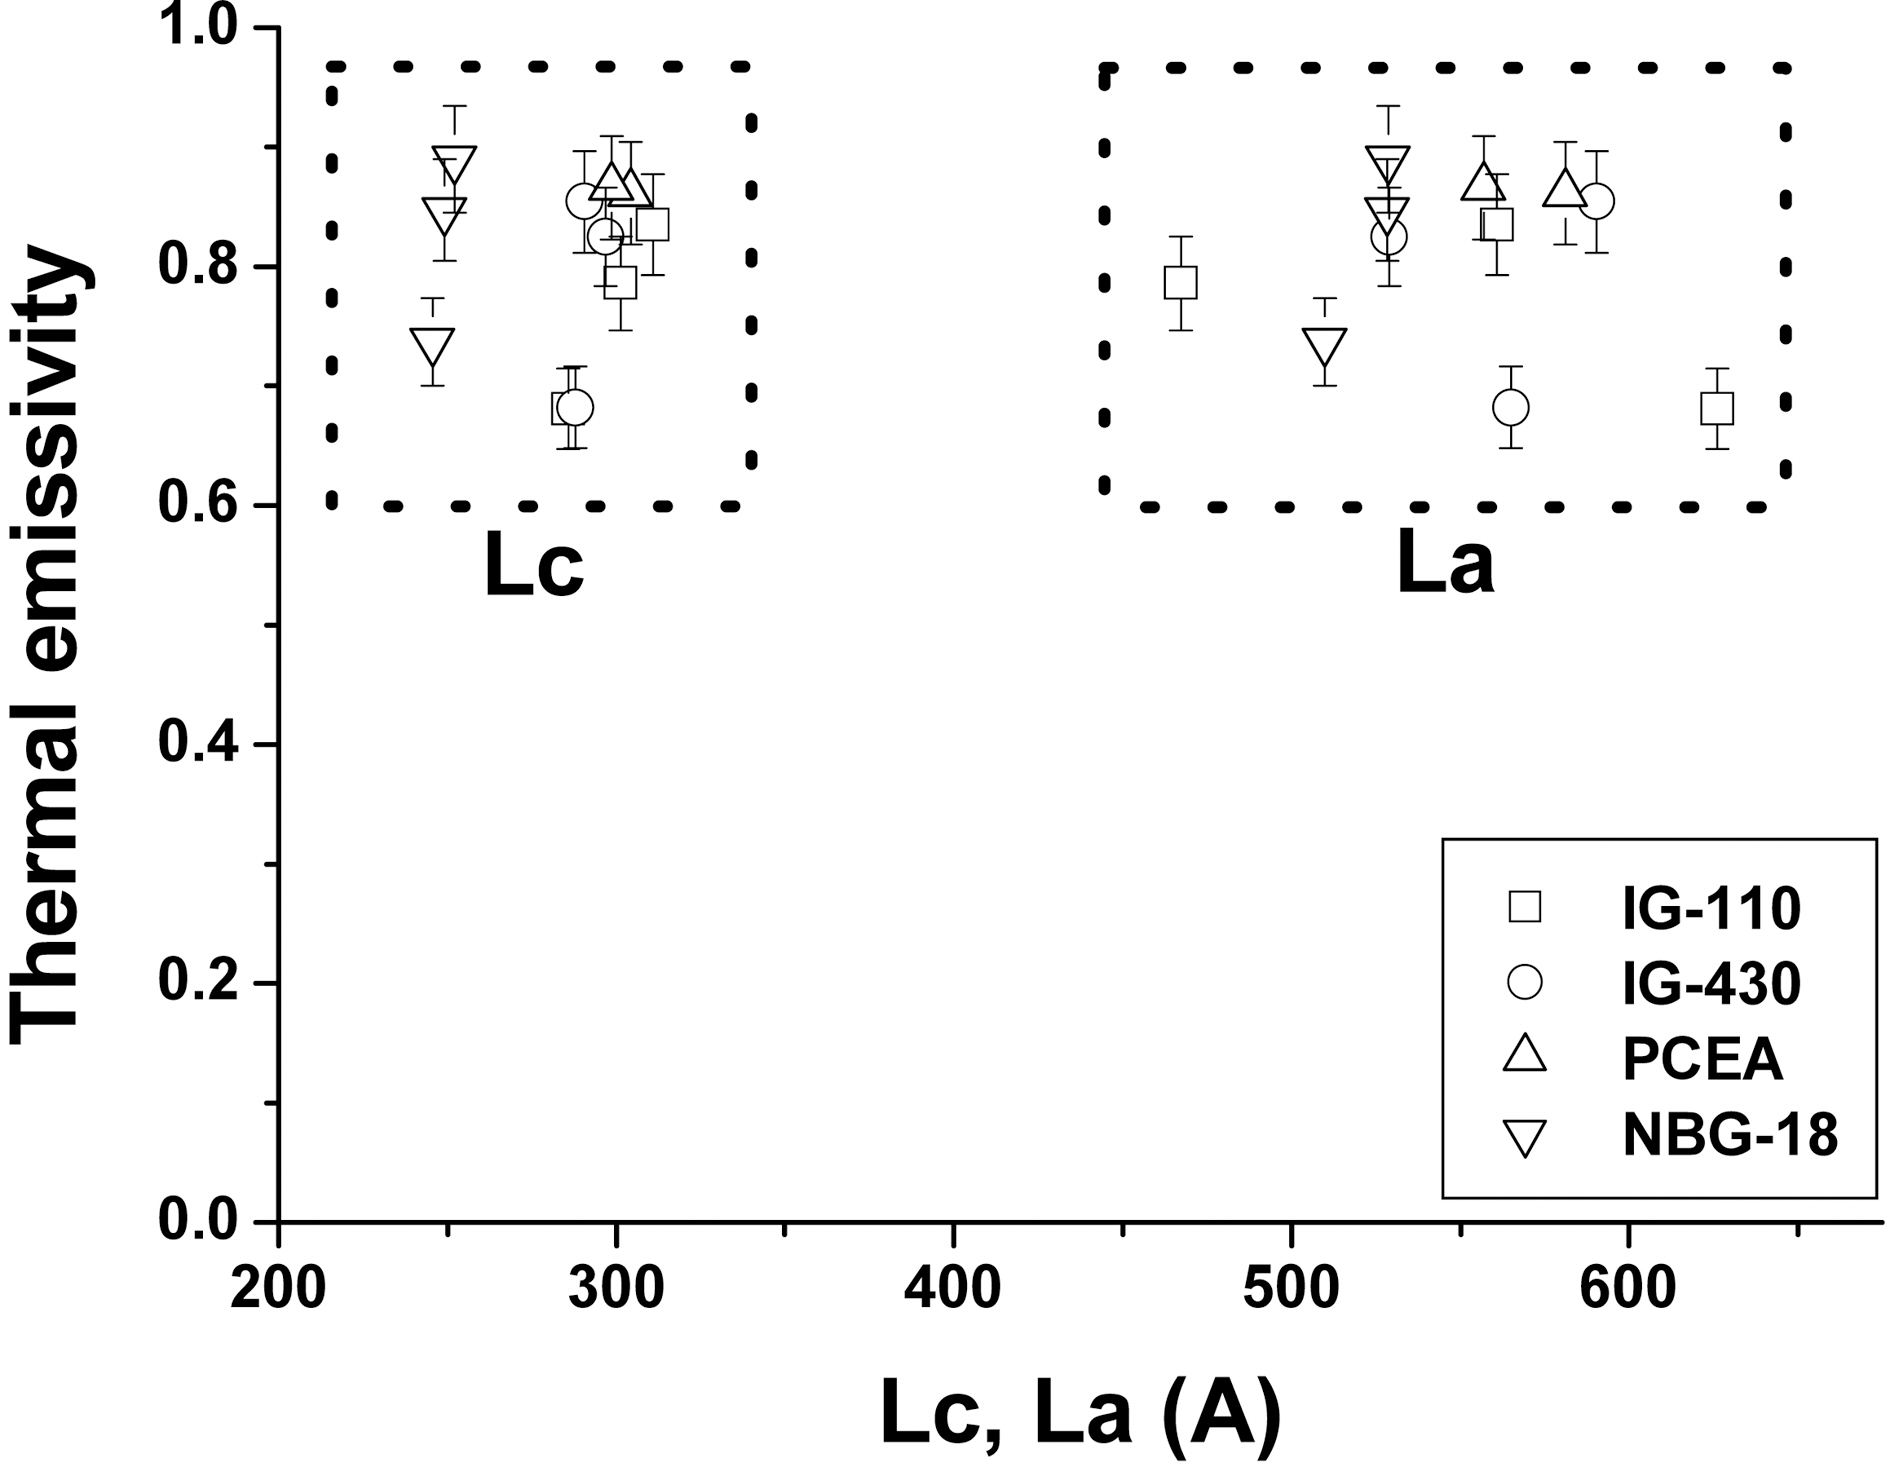 Relationship between thermal emissivity (measured at100oC) and crystallite size obtained using X-ray diffraction.